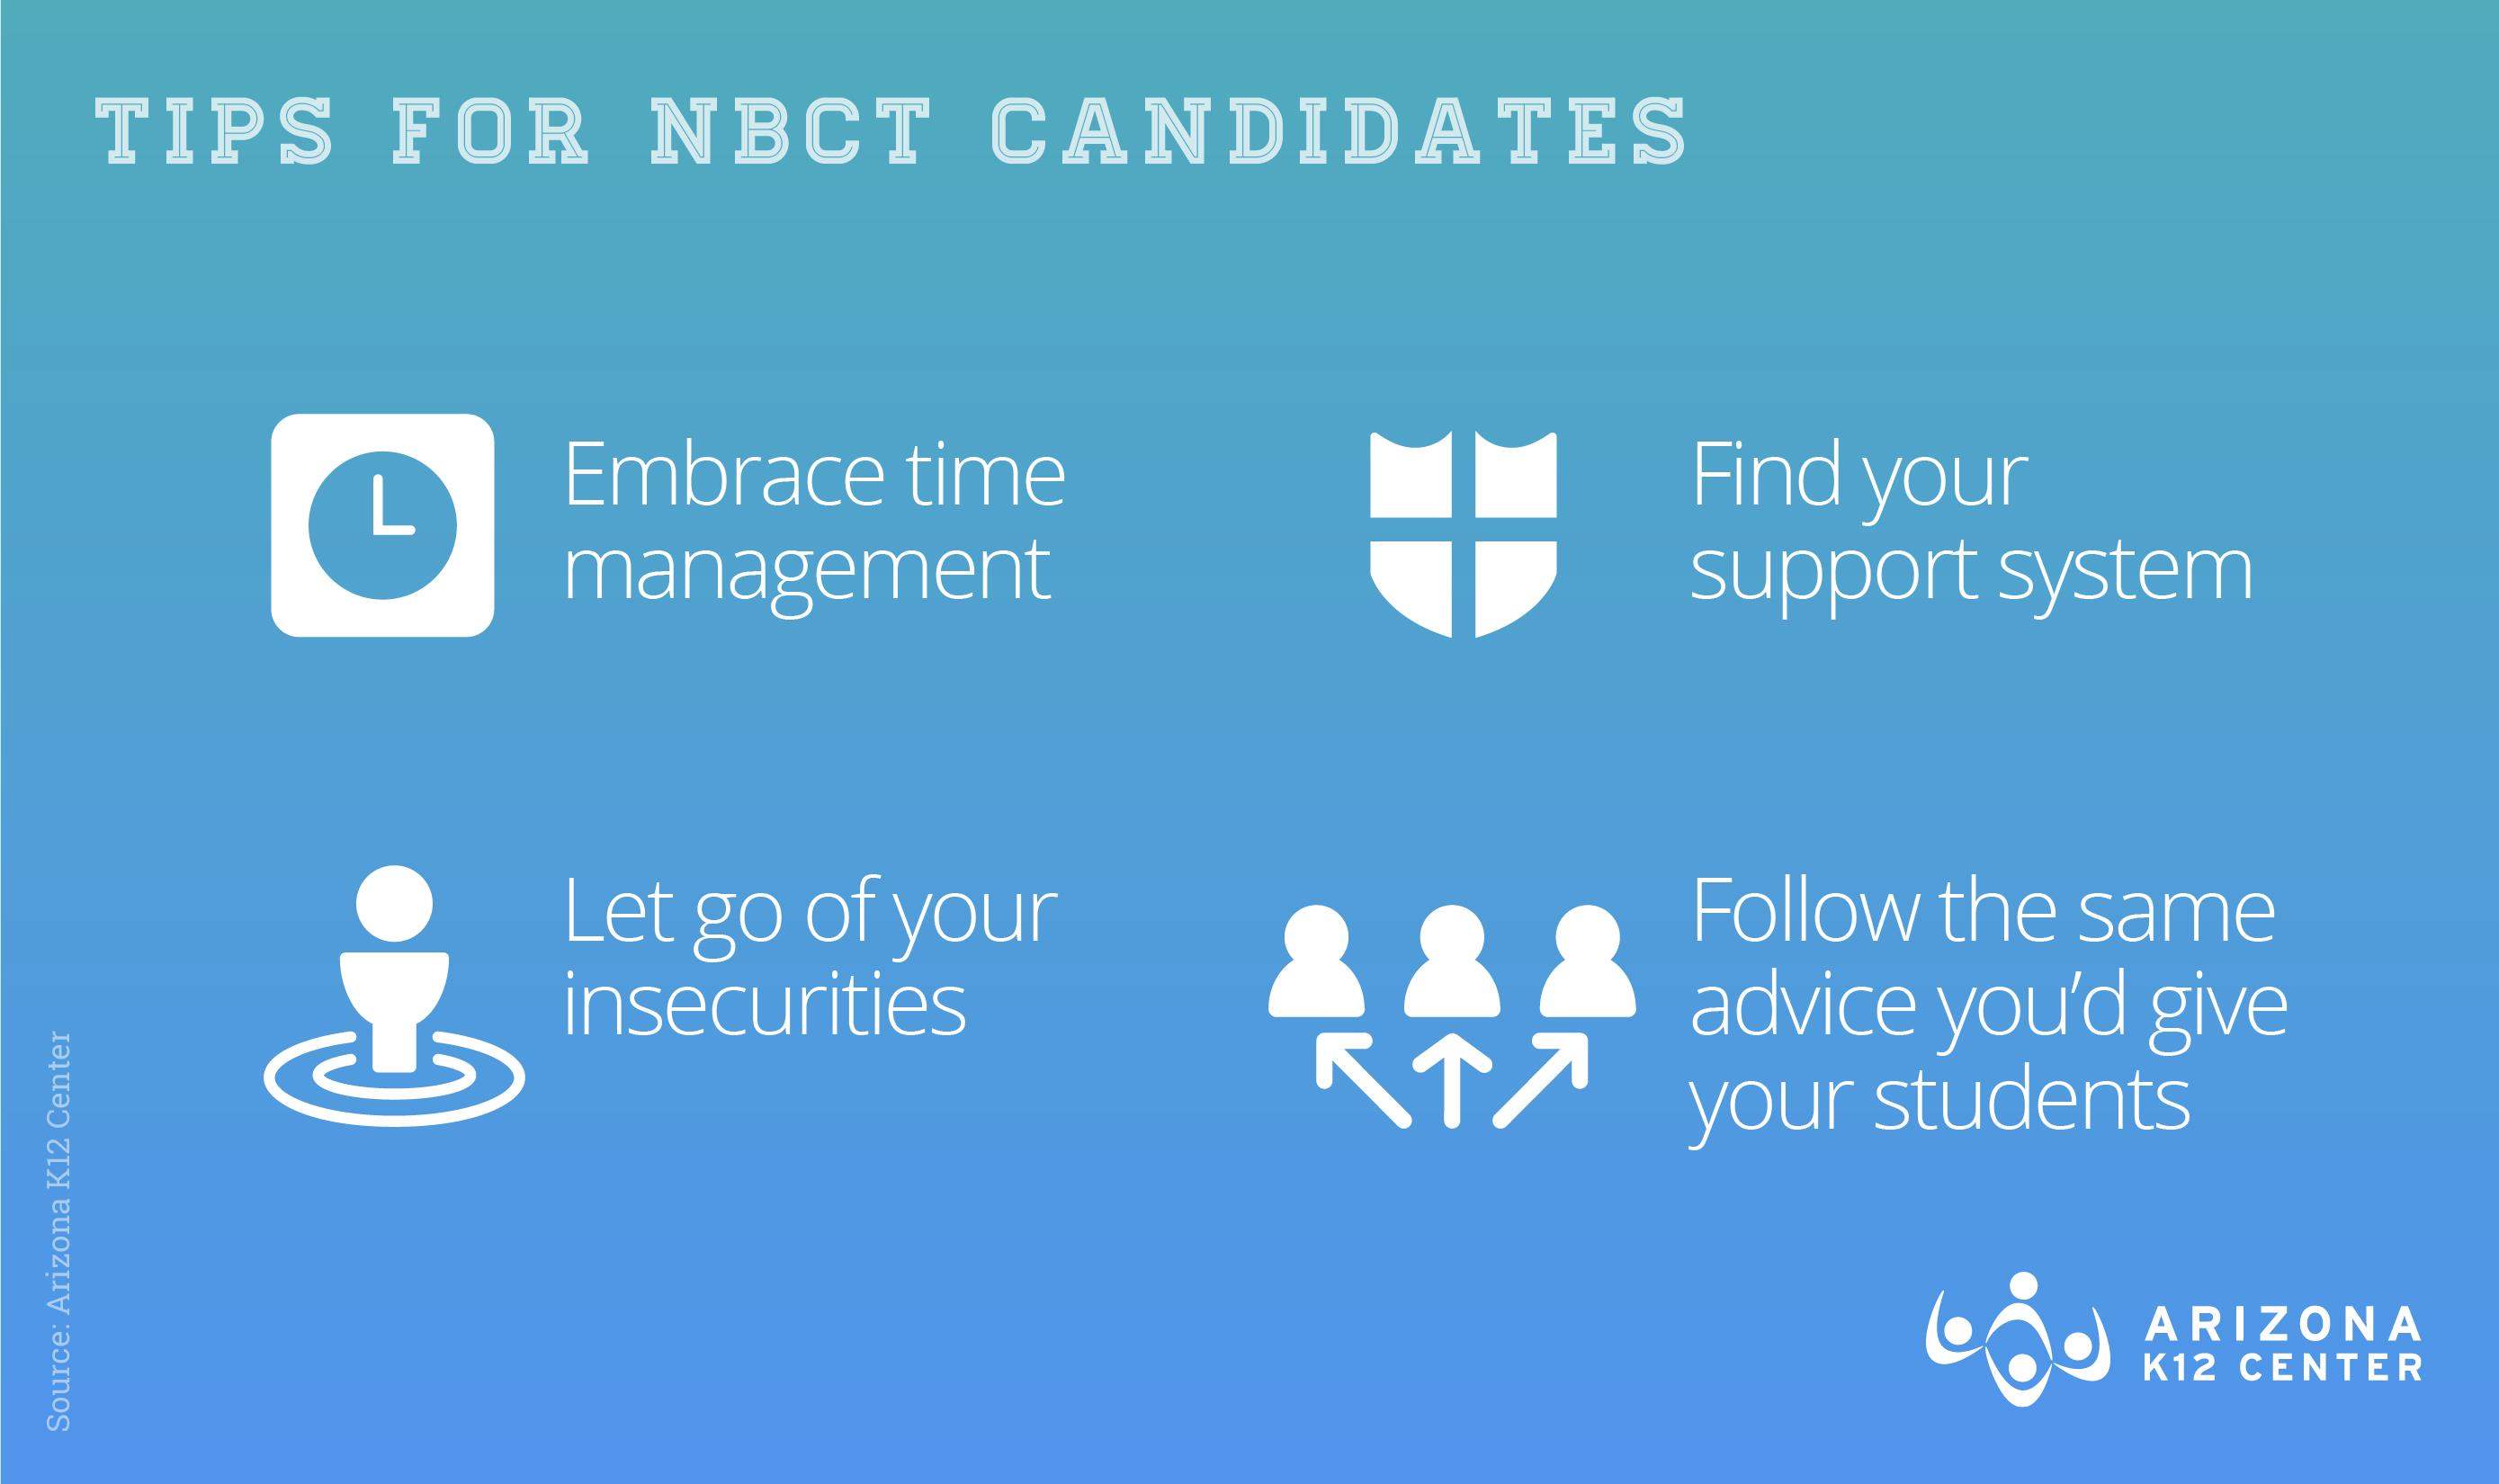 Video: NBCTs Share Their Best Strategies